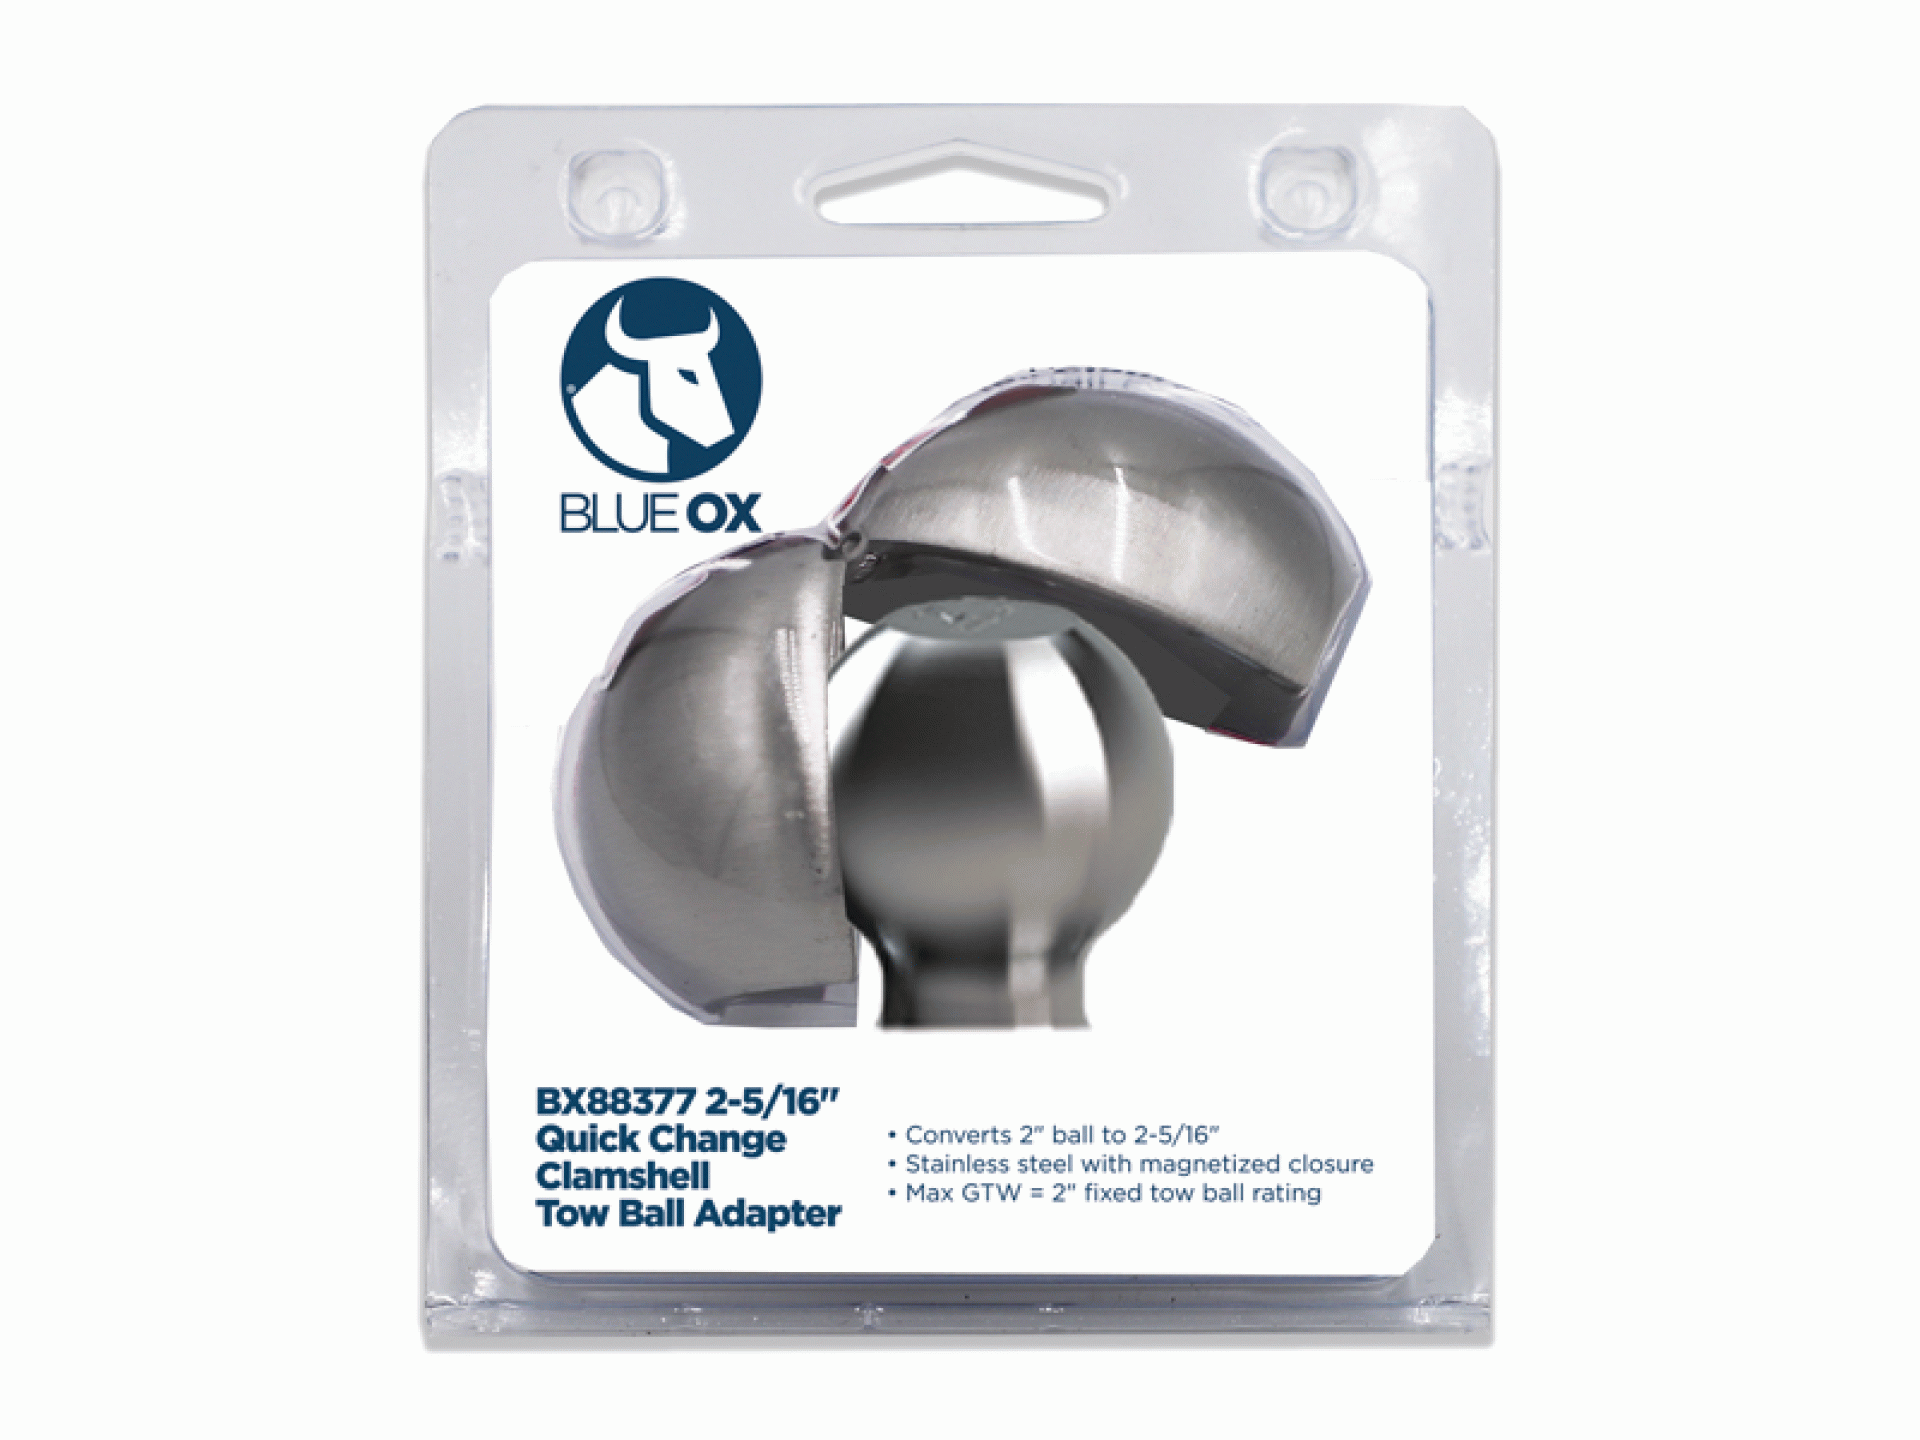 BLUE OX | BX88377 | Hitch Ball Adapter - 2" to 2-5/16"